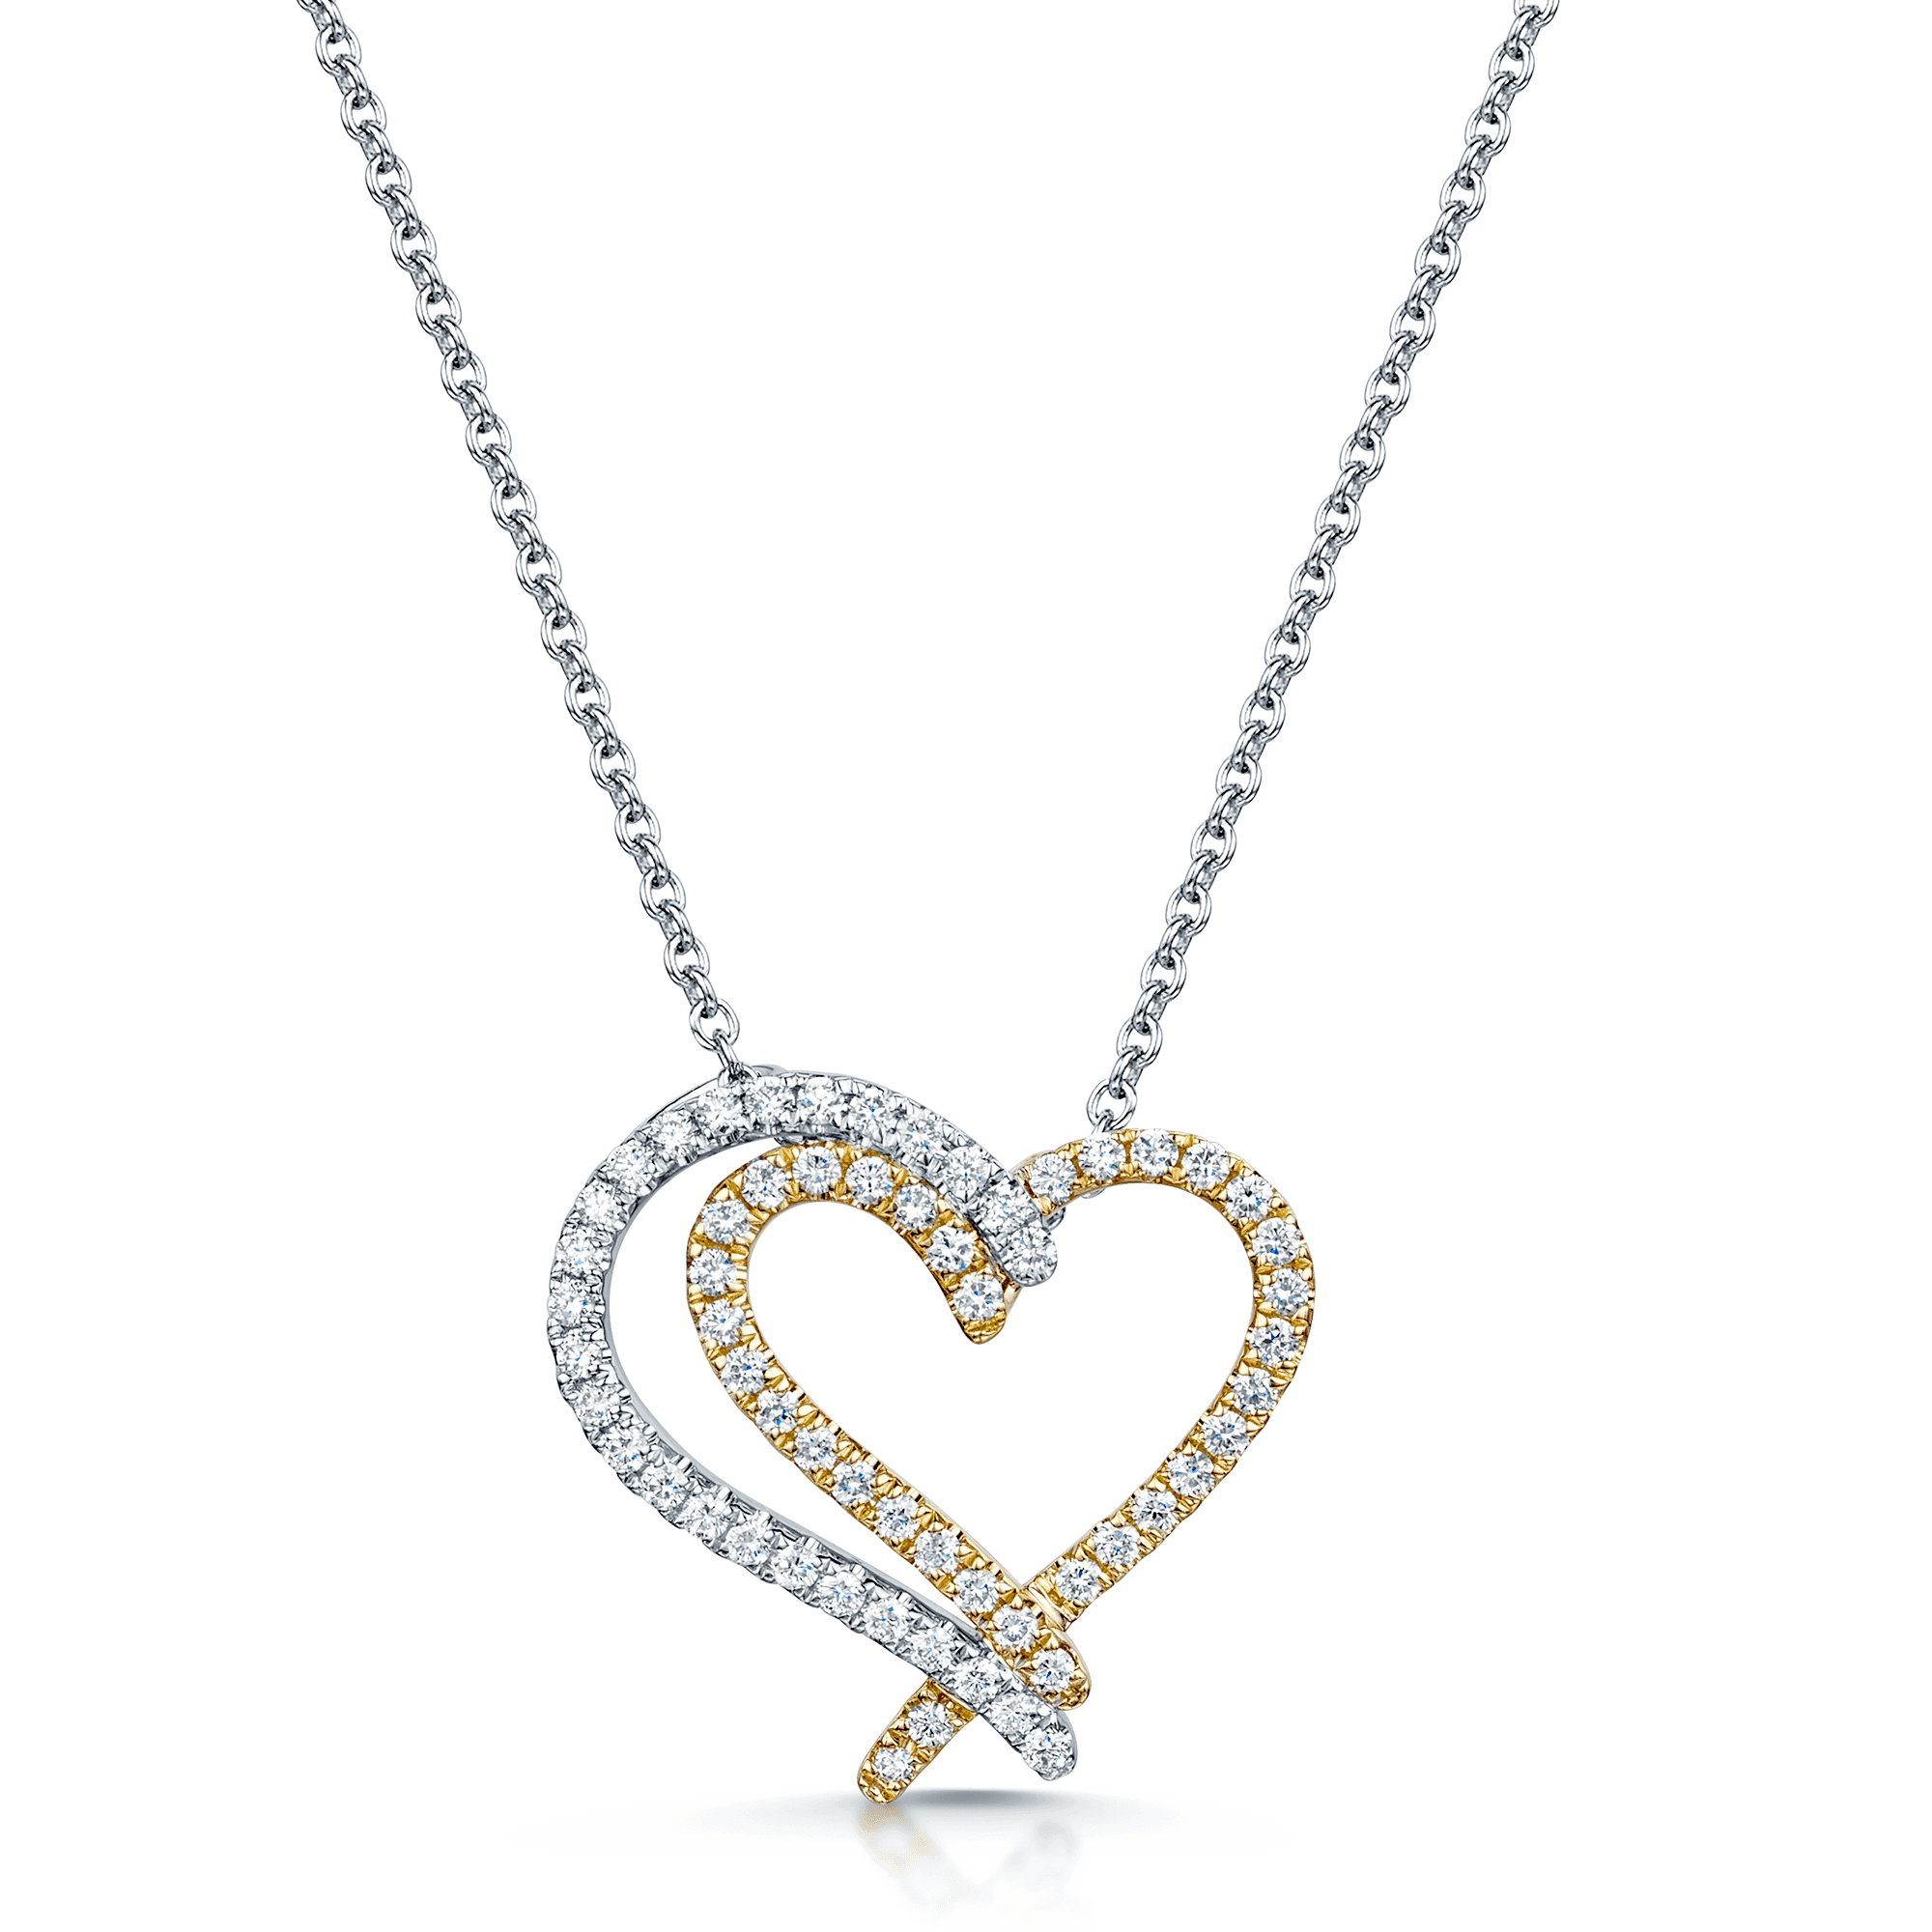 18ct Yellow And White Gold Diamond Entwined Heart Pendant